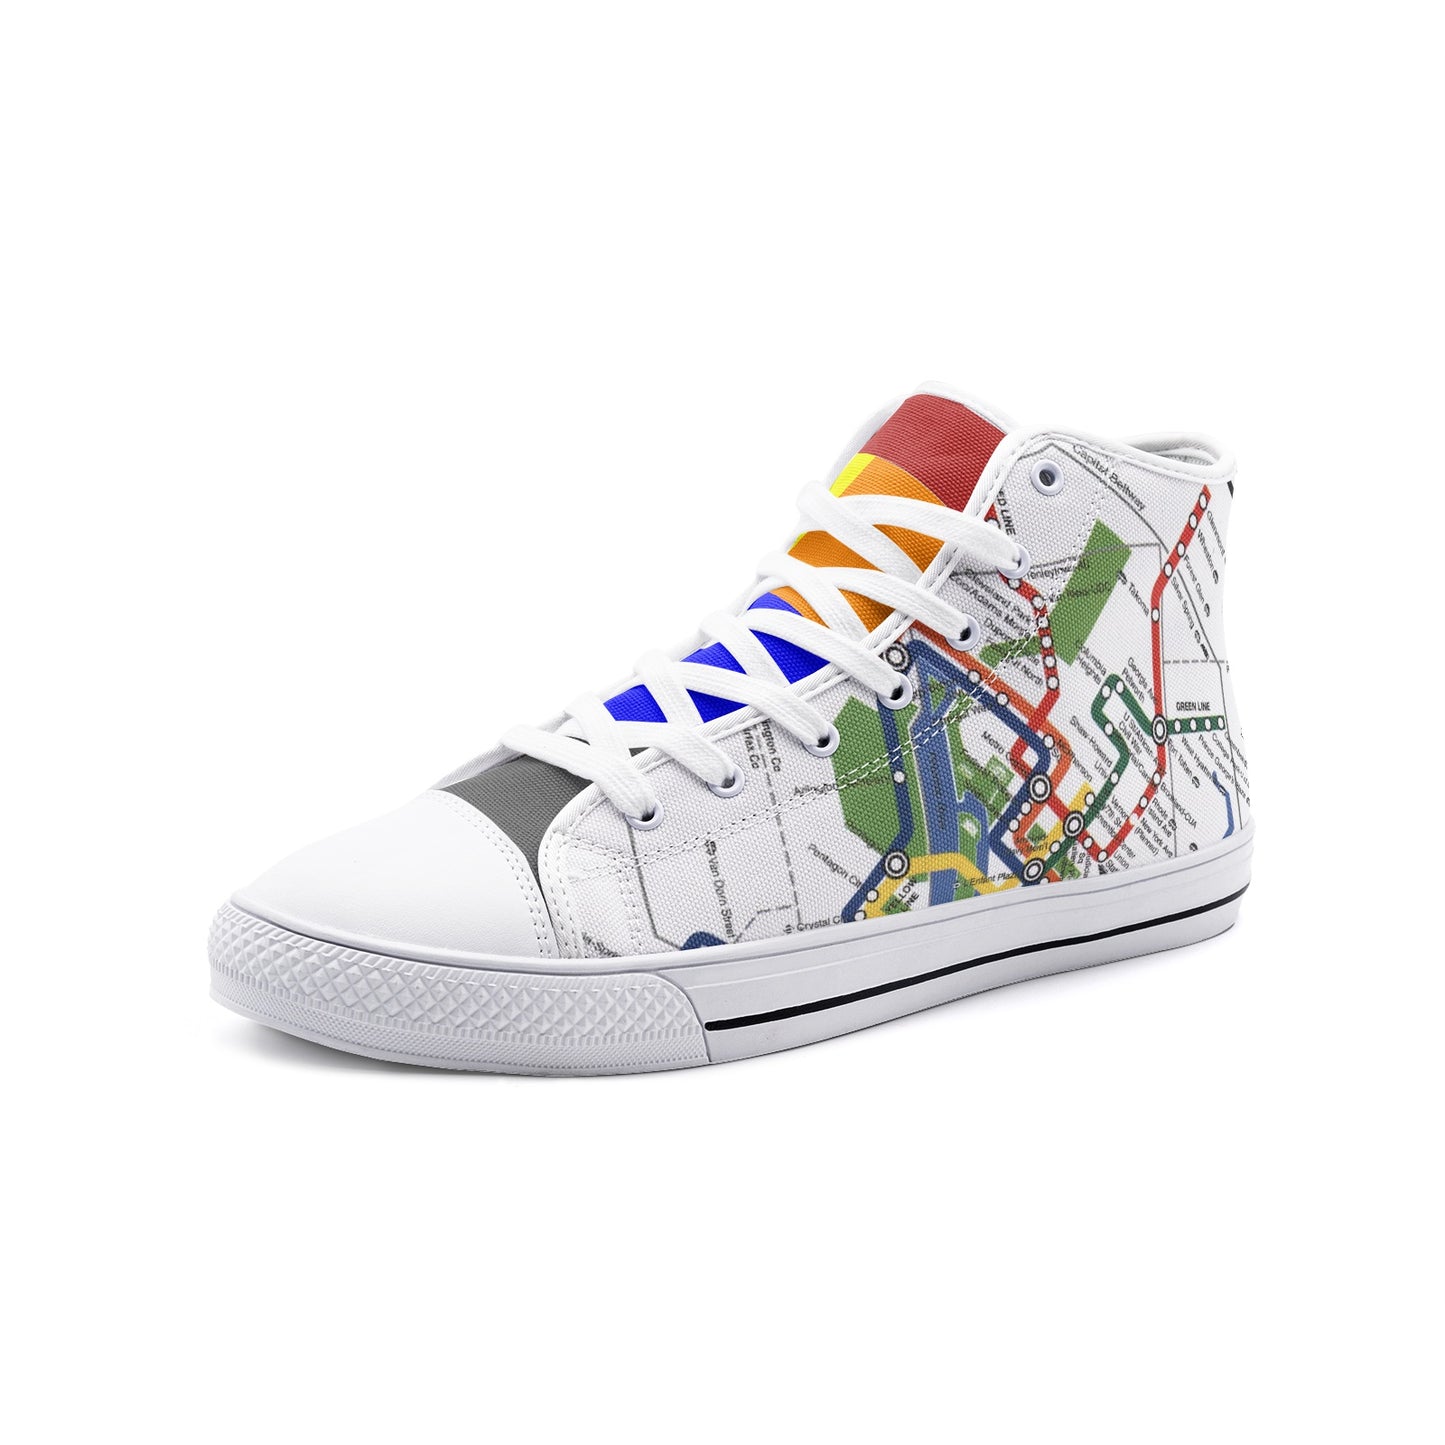 T4x red/yellow/orange/green/blue/silver line Unisex High Top's